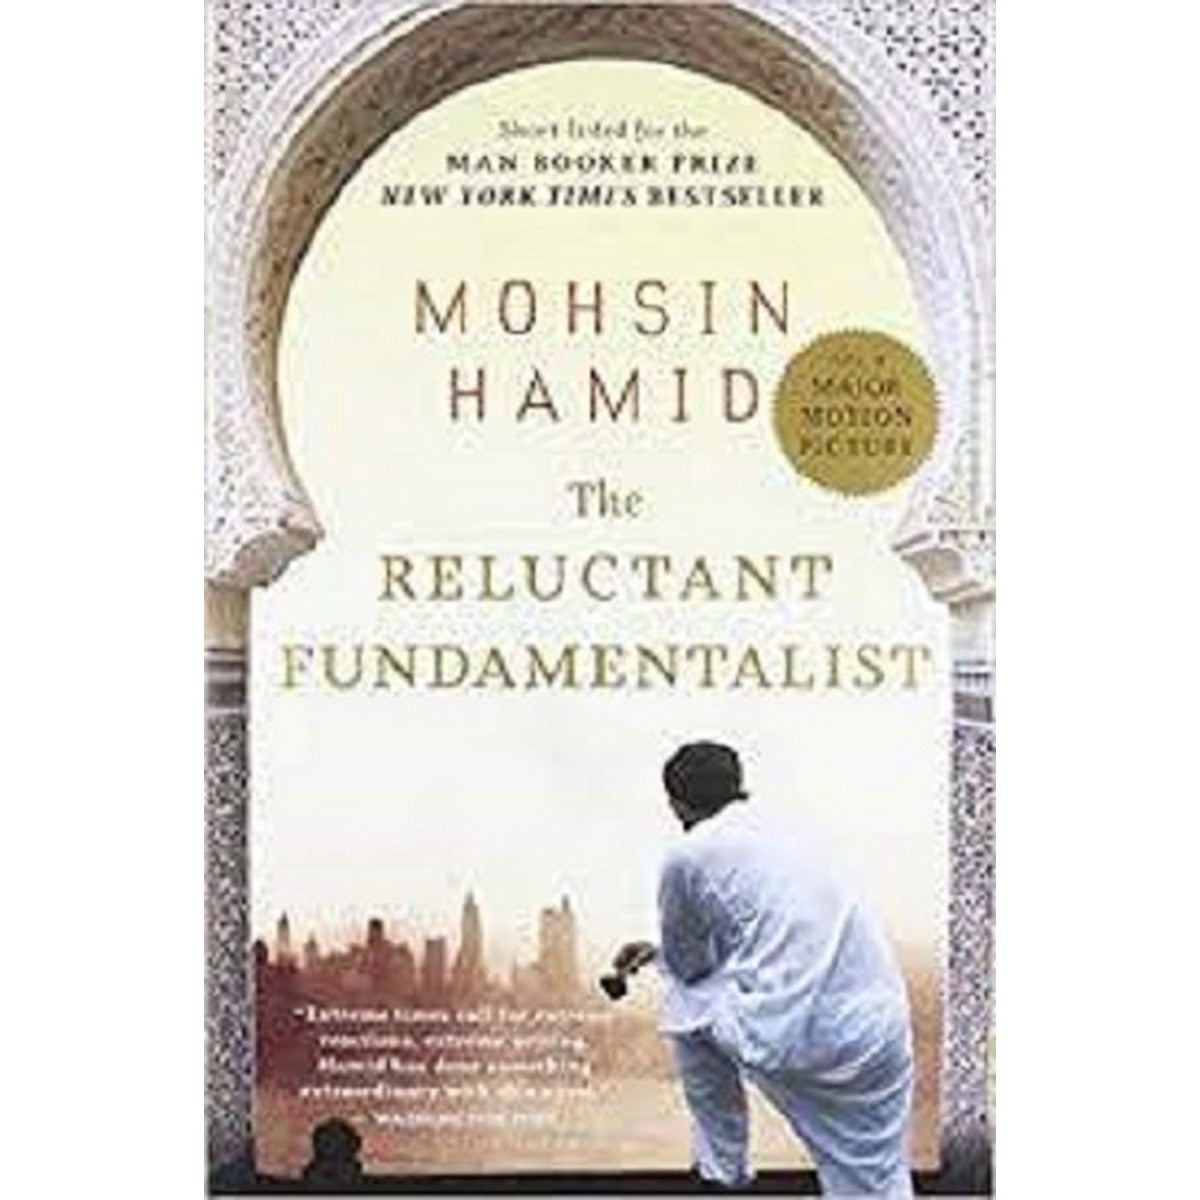 The Reluctant Fundamentalist Novel by Mohsin Hamid (book)